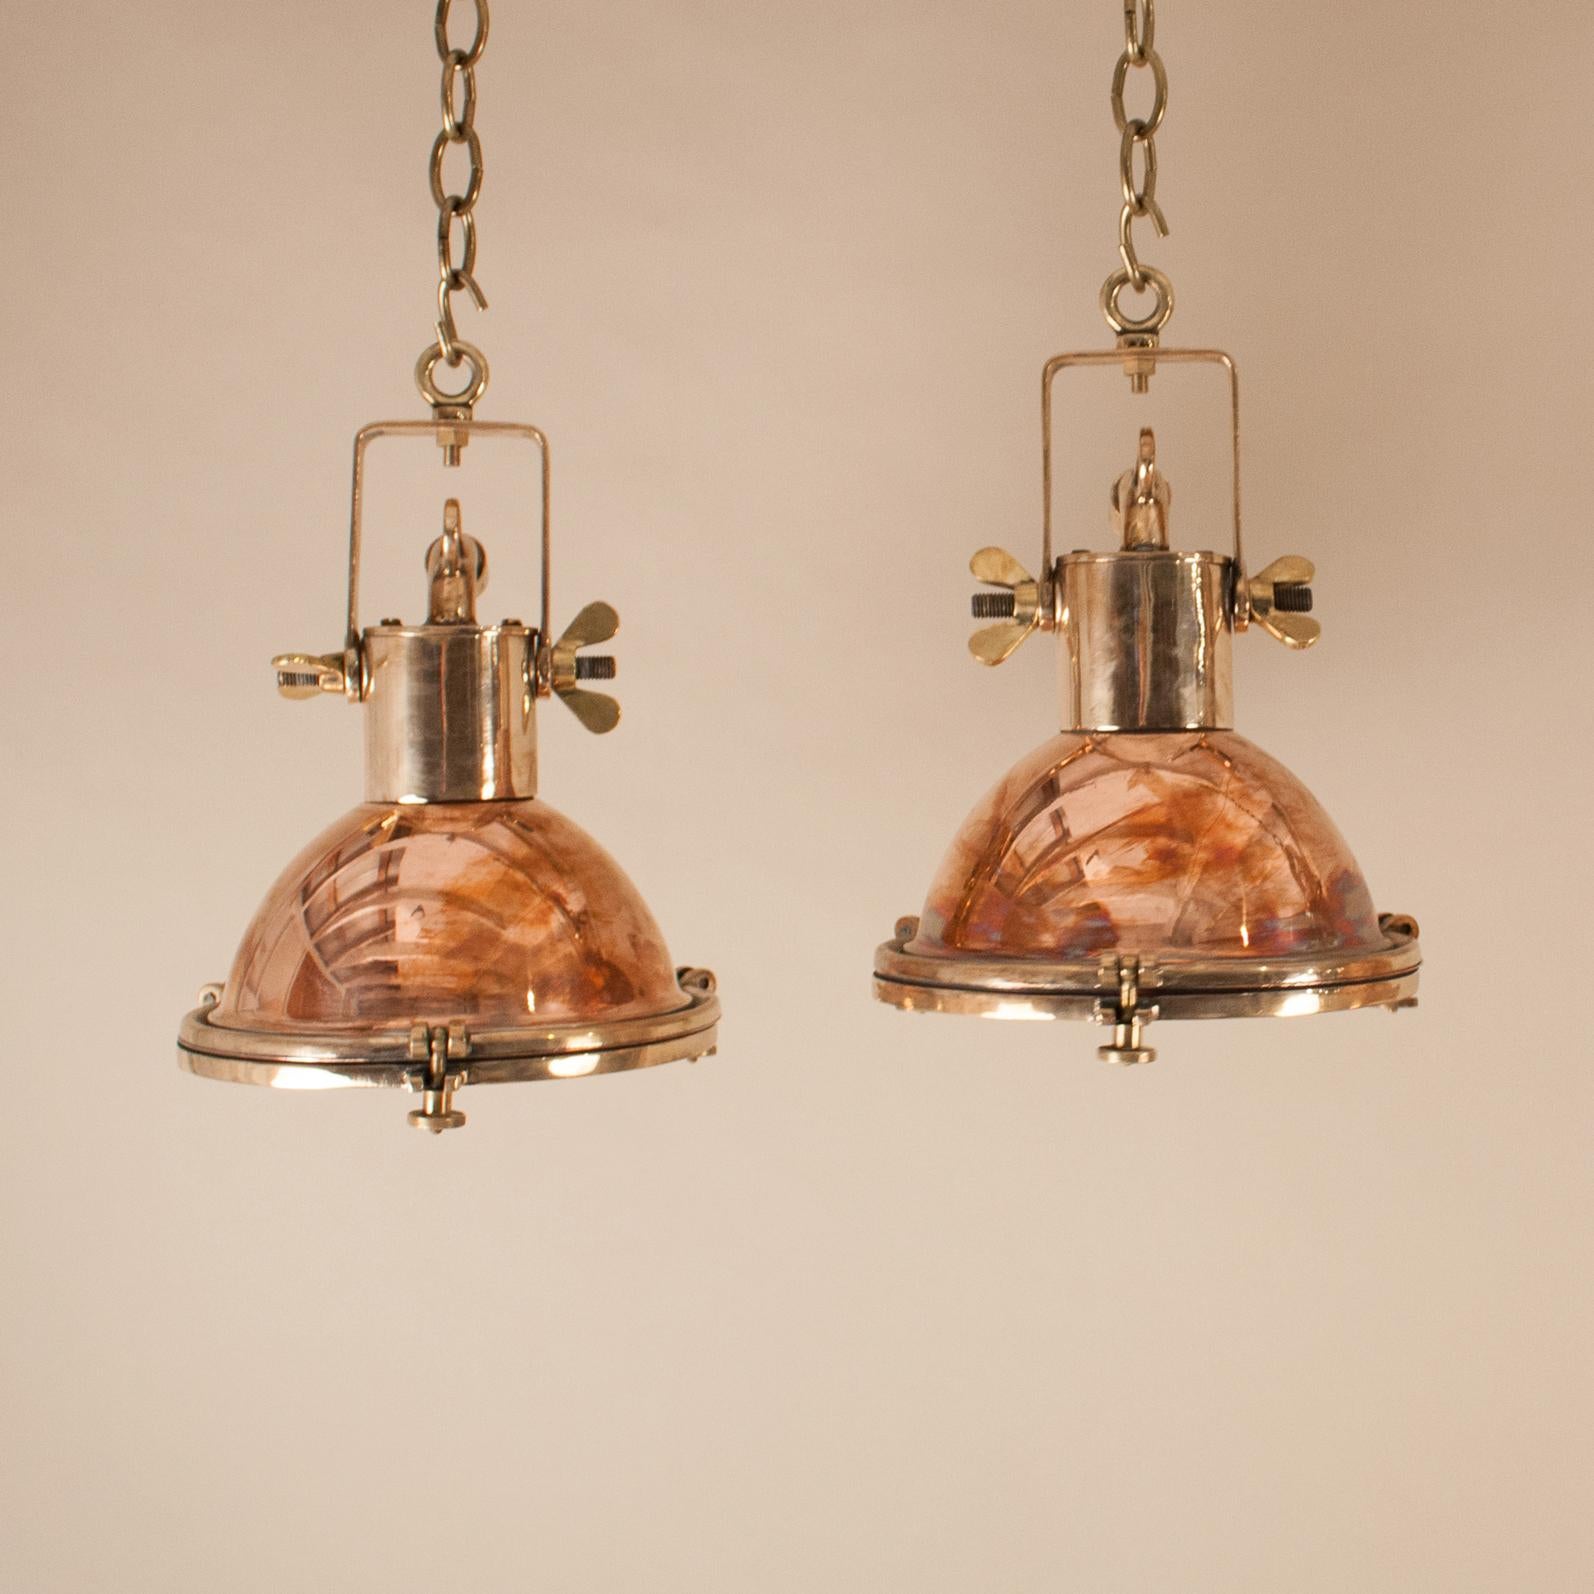 Pair of petite 1970s copper and brass ship passageway lights with nice proportion and patina. Salvaged from a maritime vessel and restored to near-original condition, these authentic Industrial pendants have interior reflectors and glass lenses. The